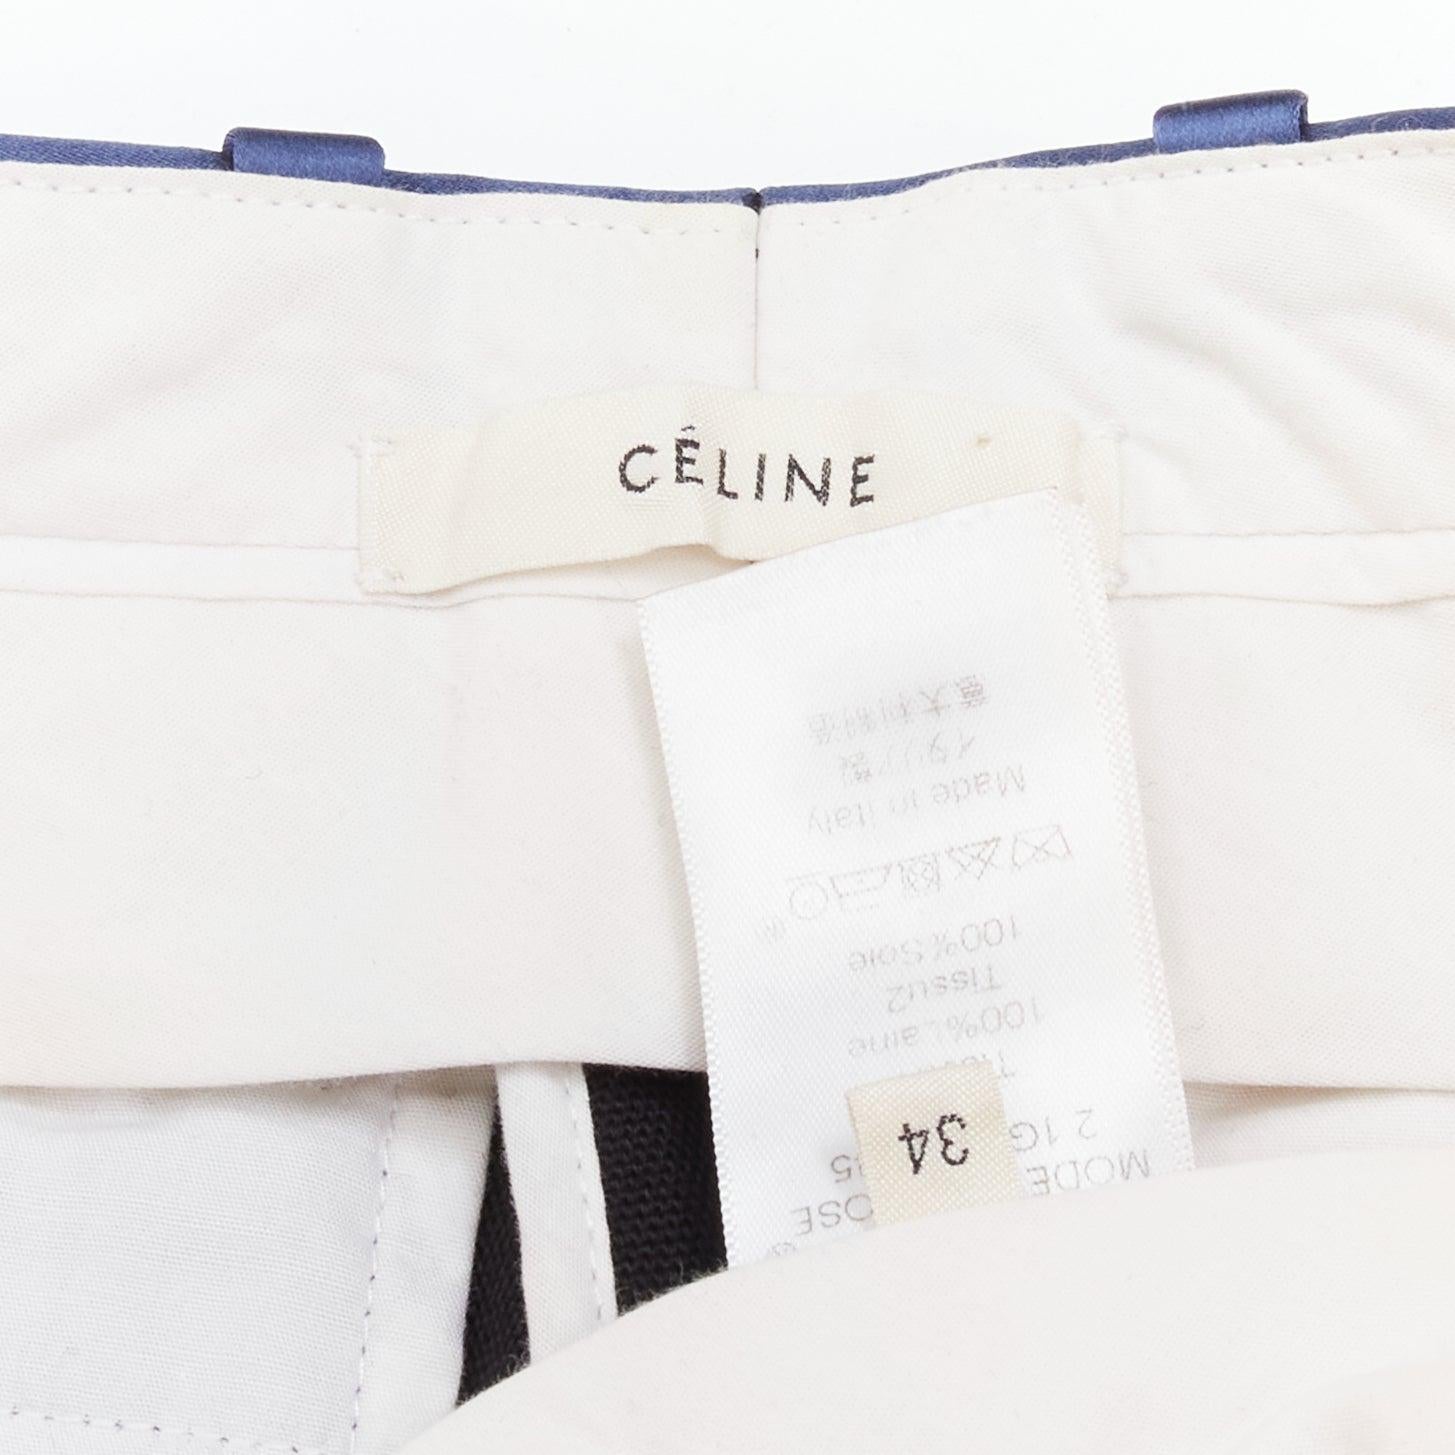 OLD CELINE Phoebe Philo blue silk trimmed black wool pleated trousers FR34 XS For Sale 5